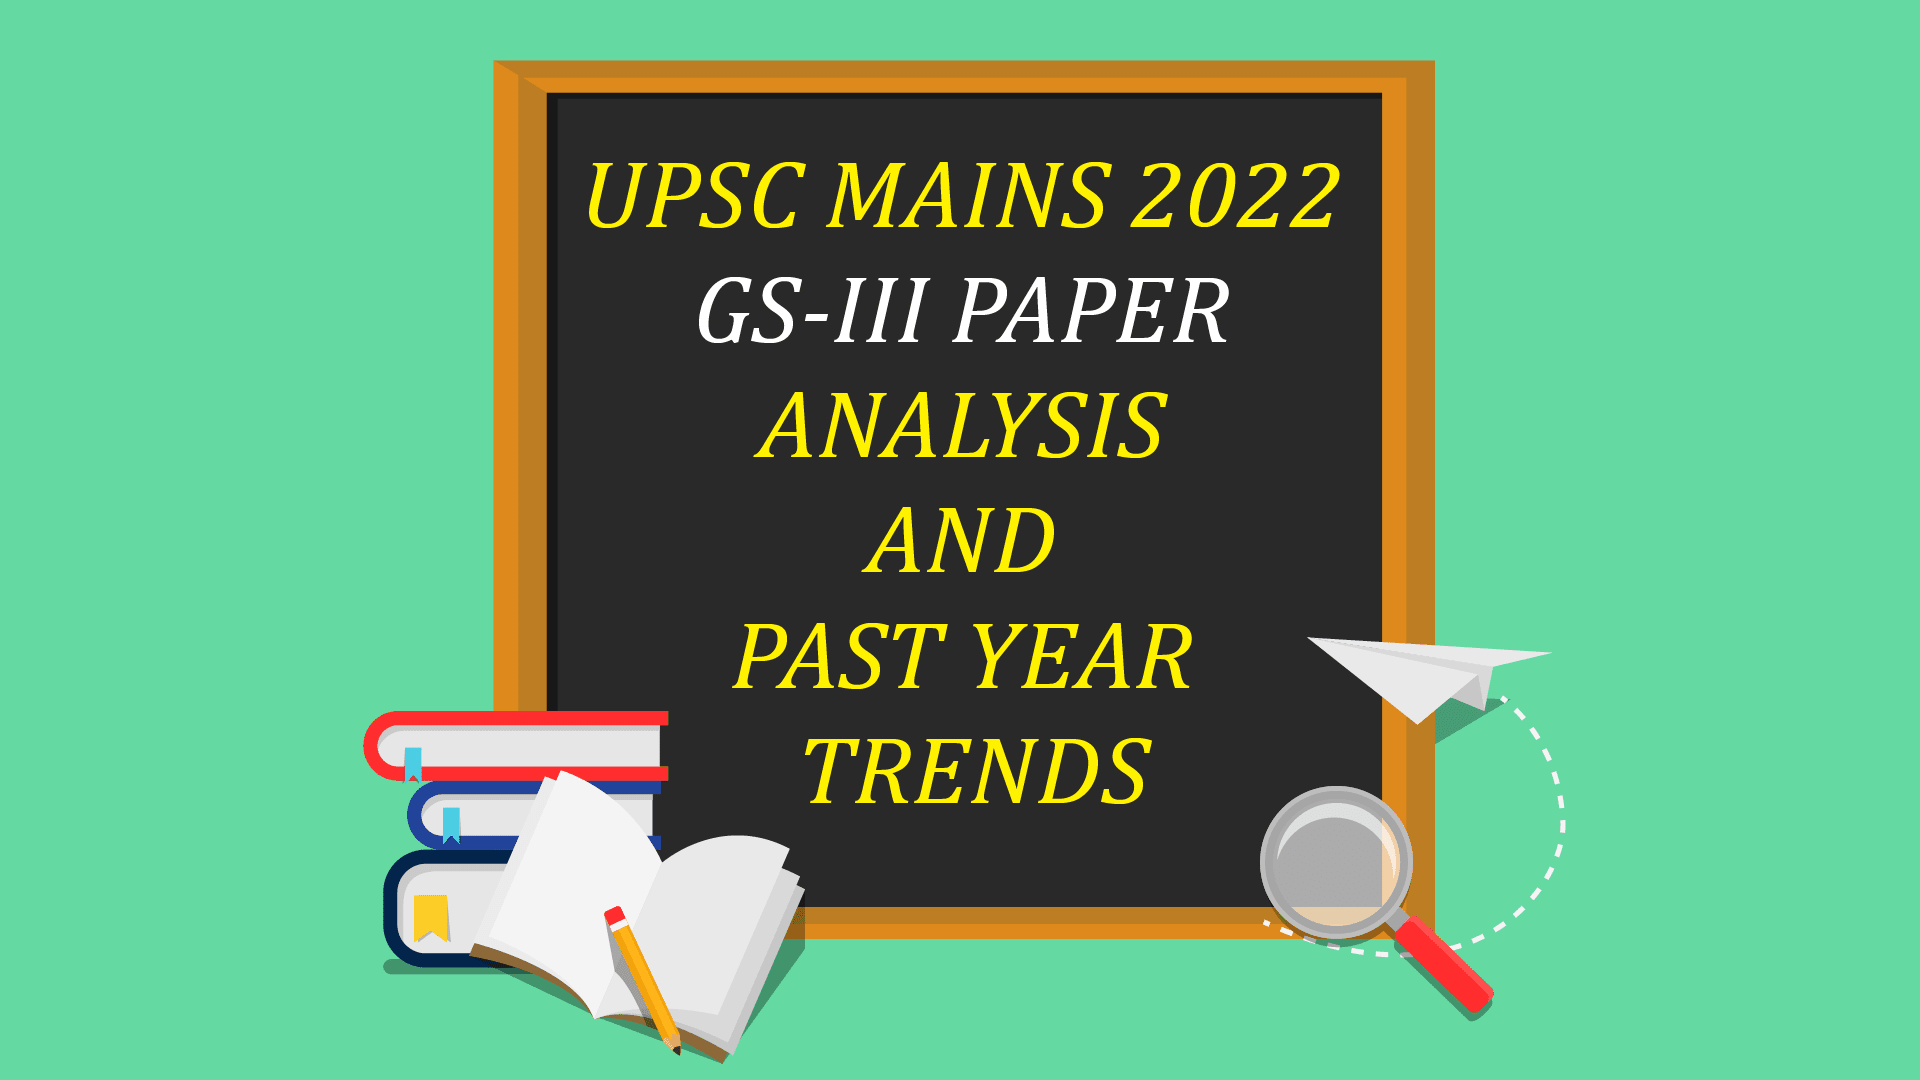 UPSC Mains 2022 GS-III Paper Questions & Analysis